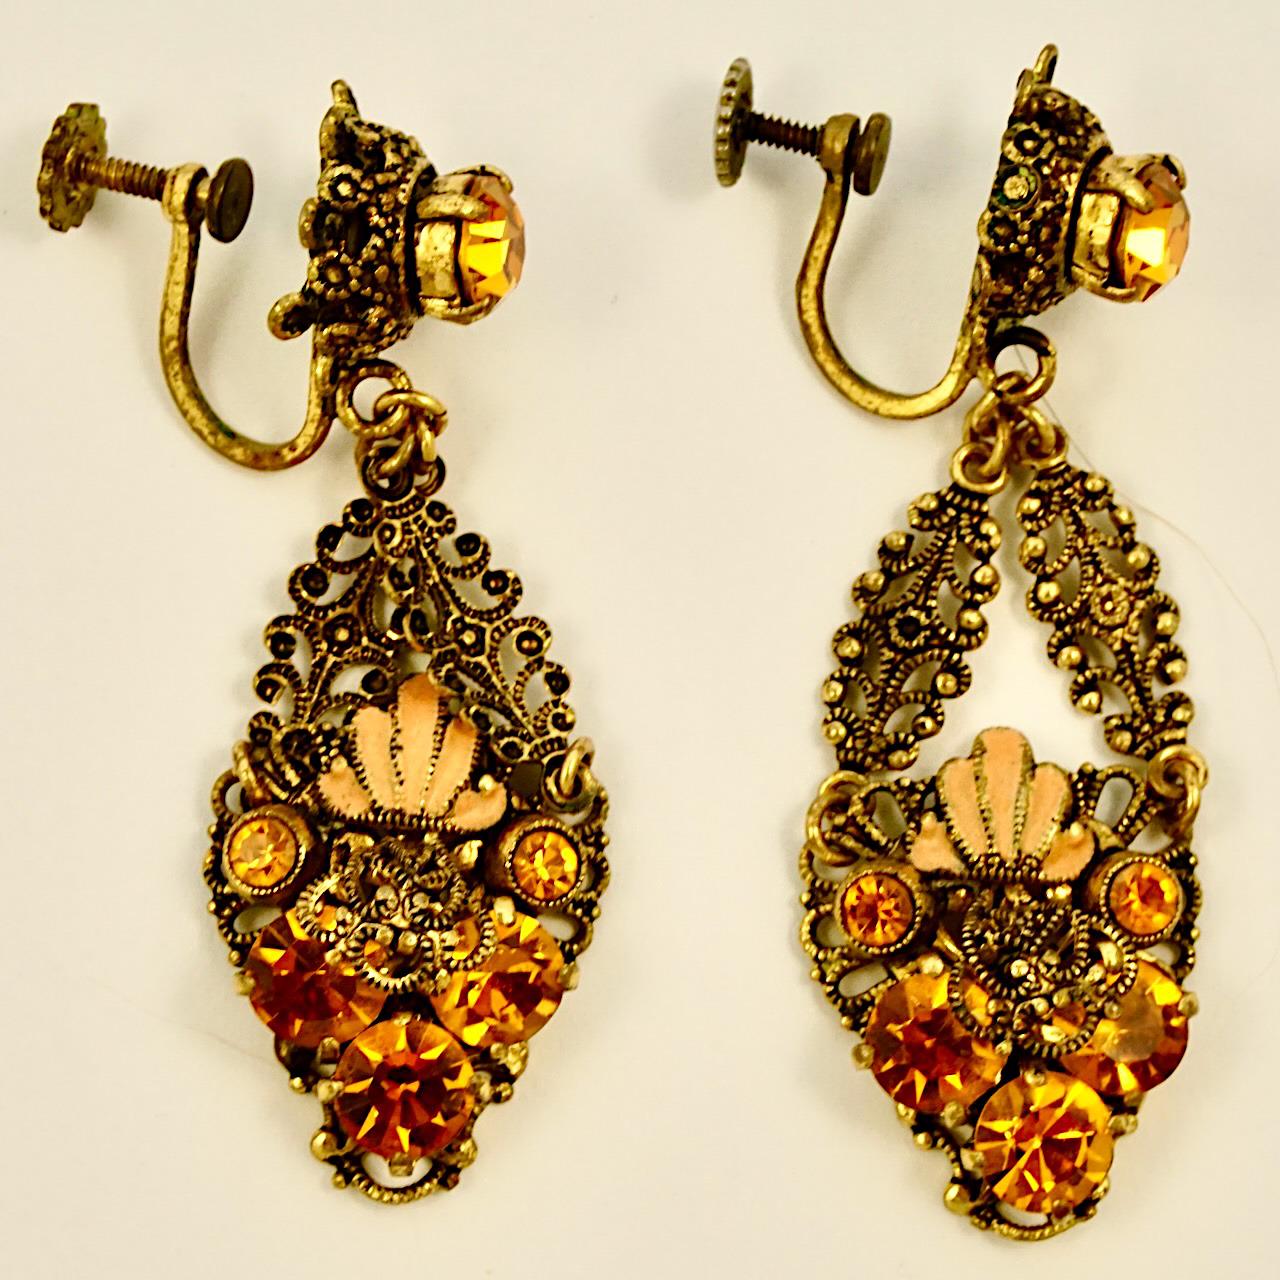 Gold Plated Filigree and Citrine Rhinestone Link Bracelet and Earrings Set For Sale 2